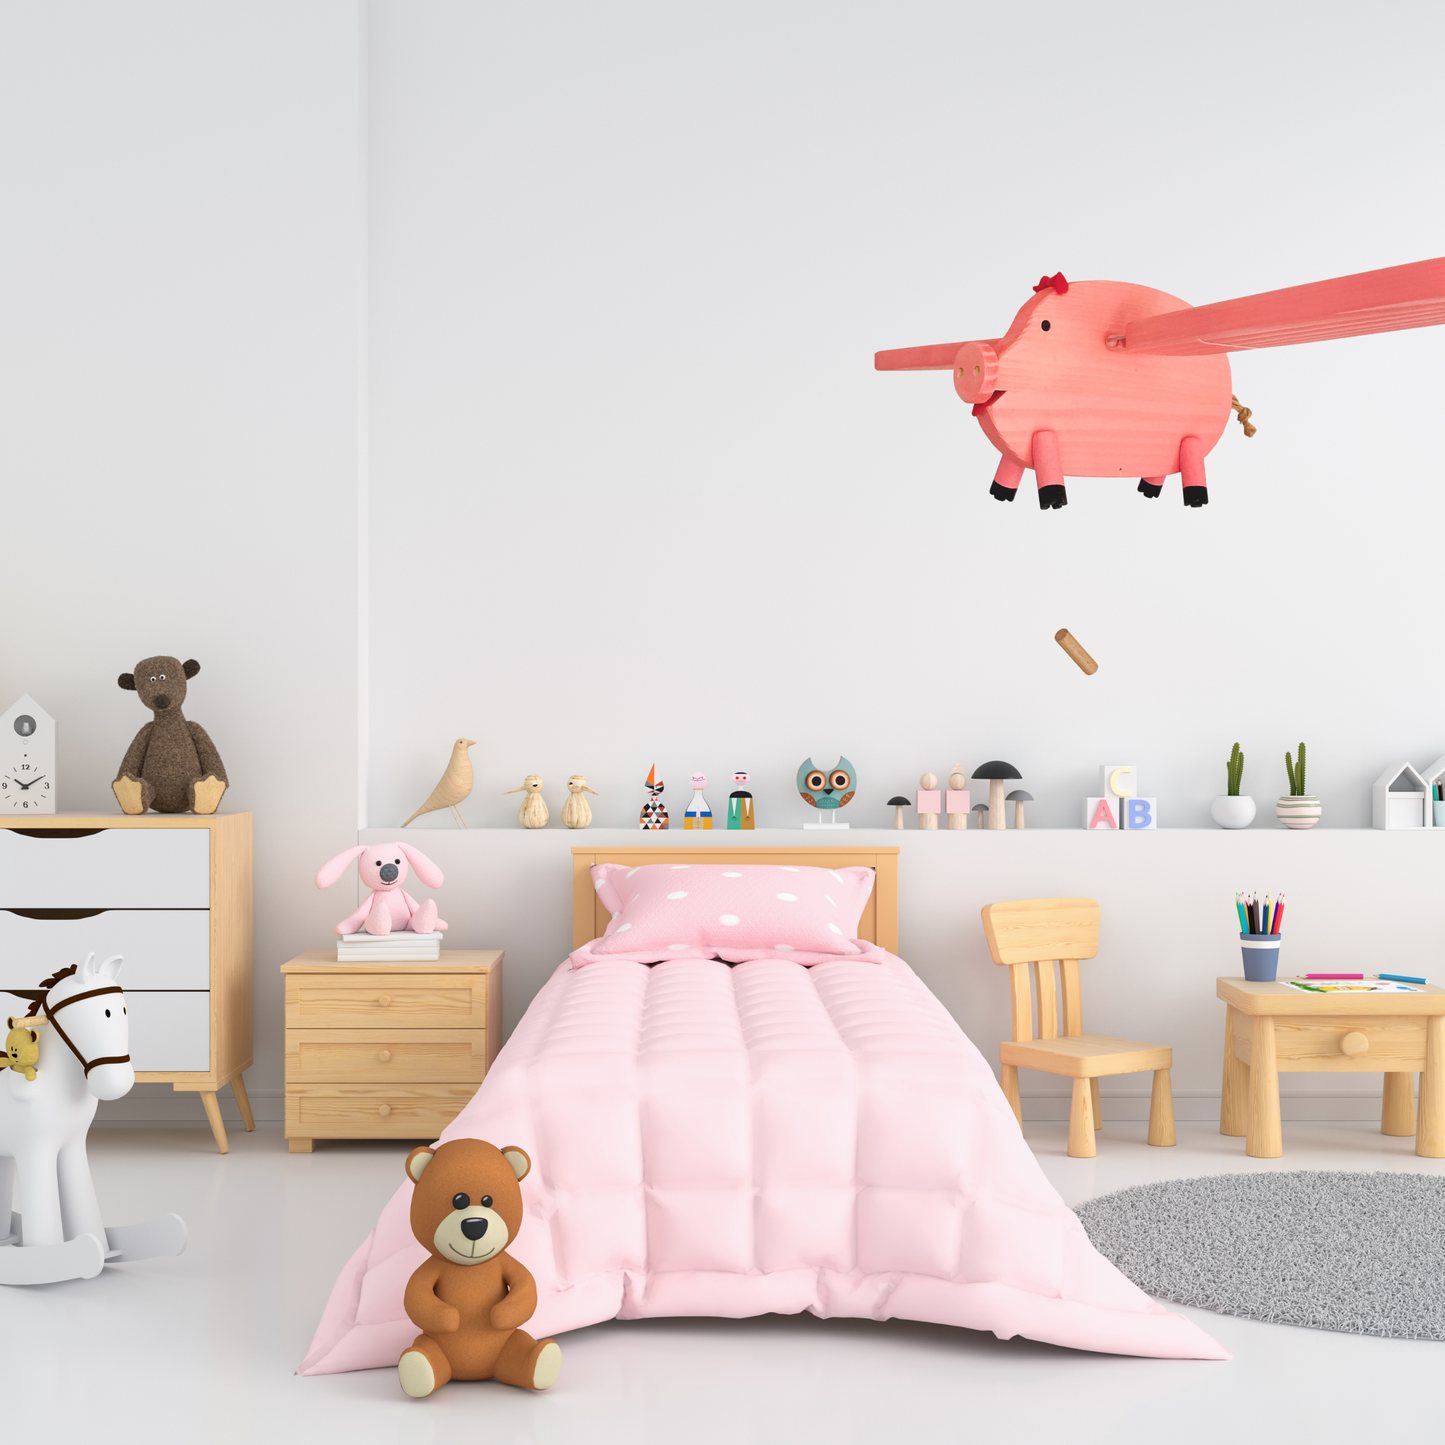 Pink Pig with Black Spots Wooden Nursery Mobile - Eco Friendly Wooden Toy